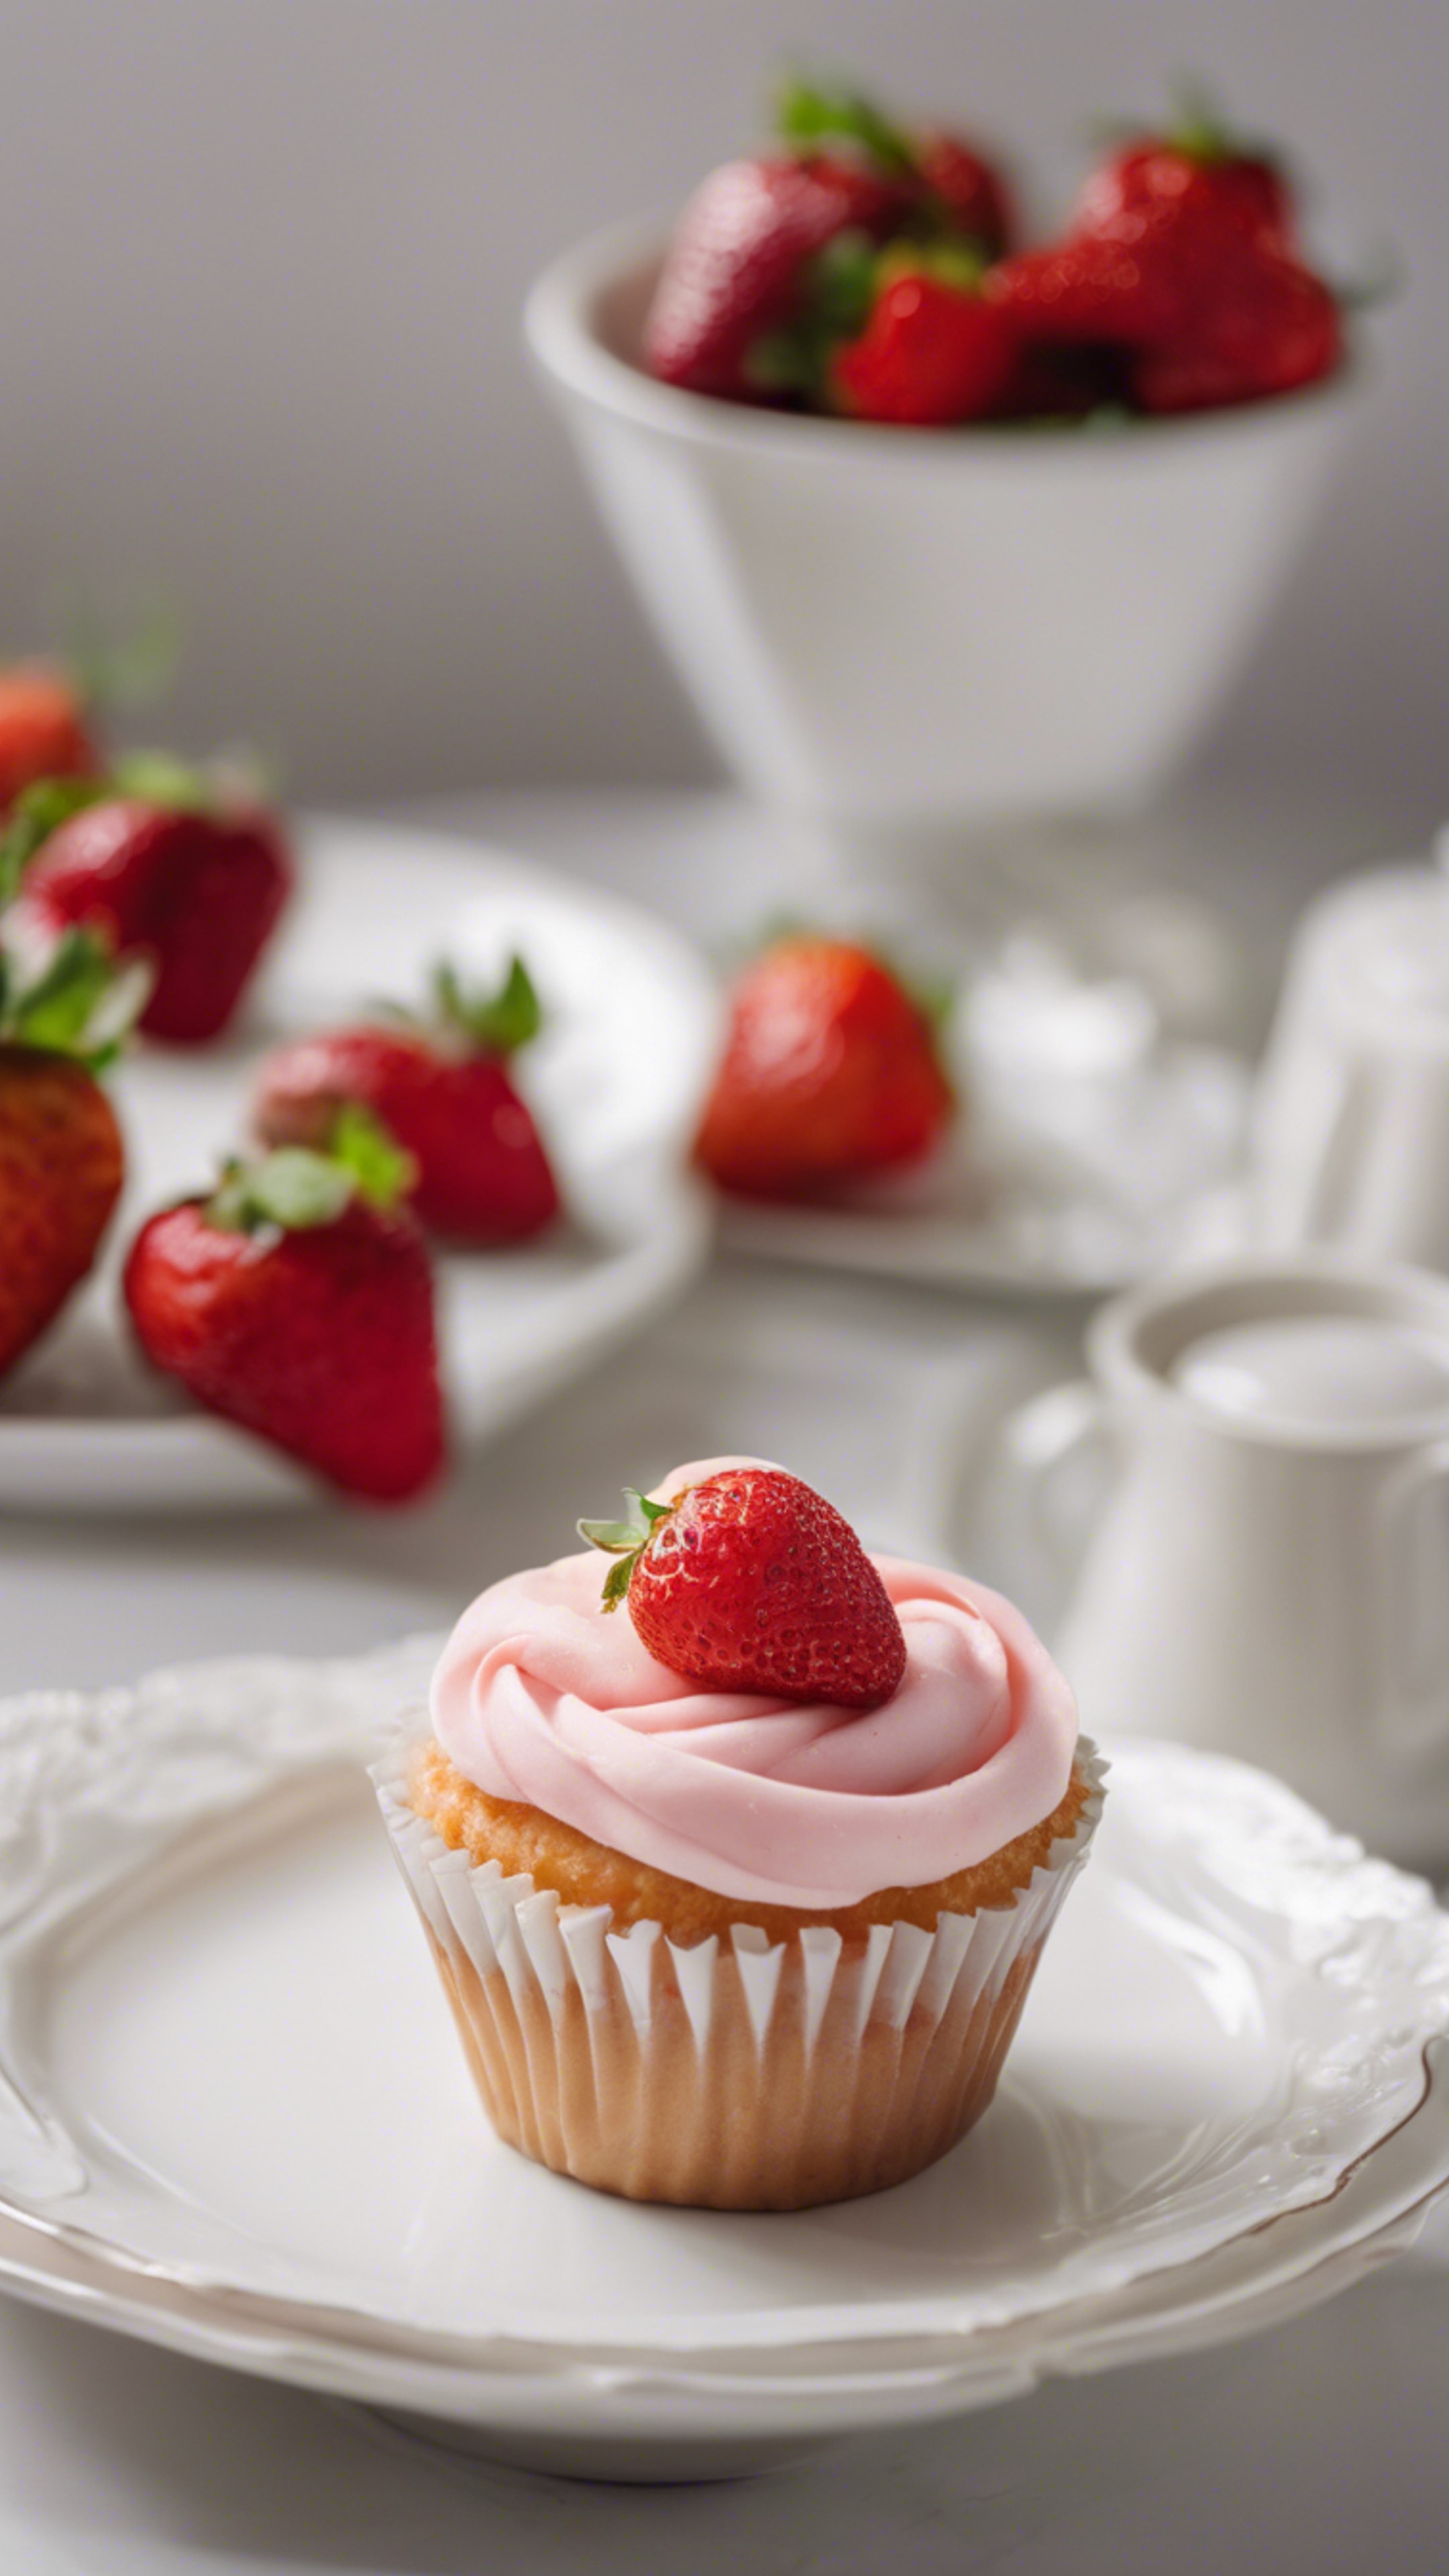 A single strawberry cupcake on a white porcelain plate in bright daylight. Wallpaper[ddcb3576222e4604b5c8]